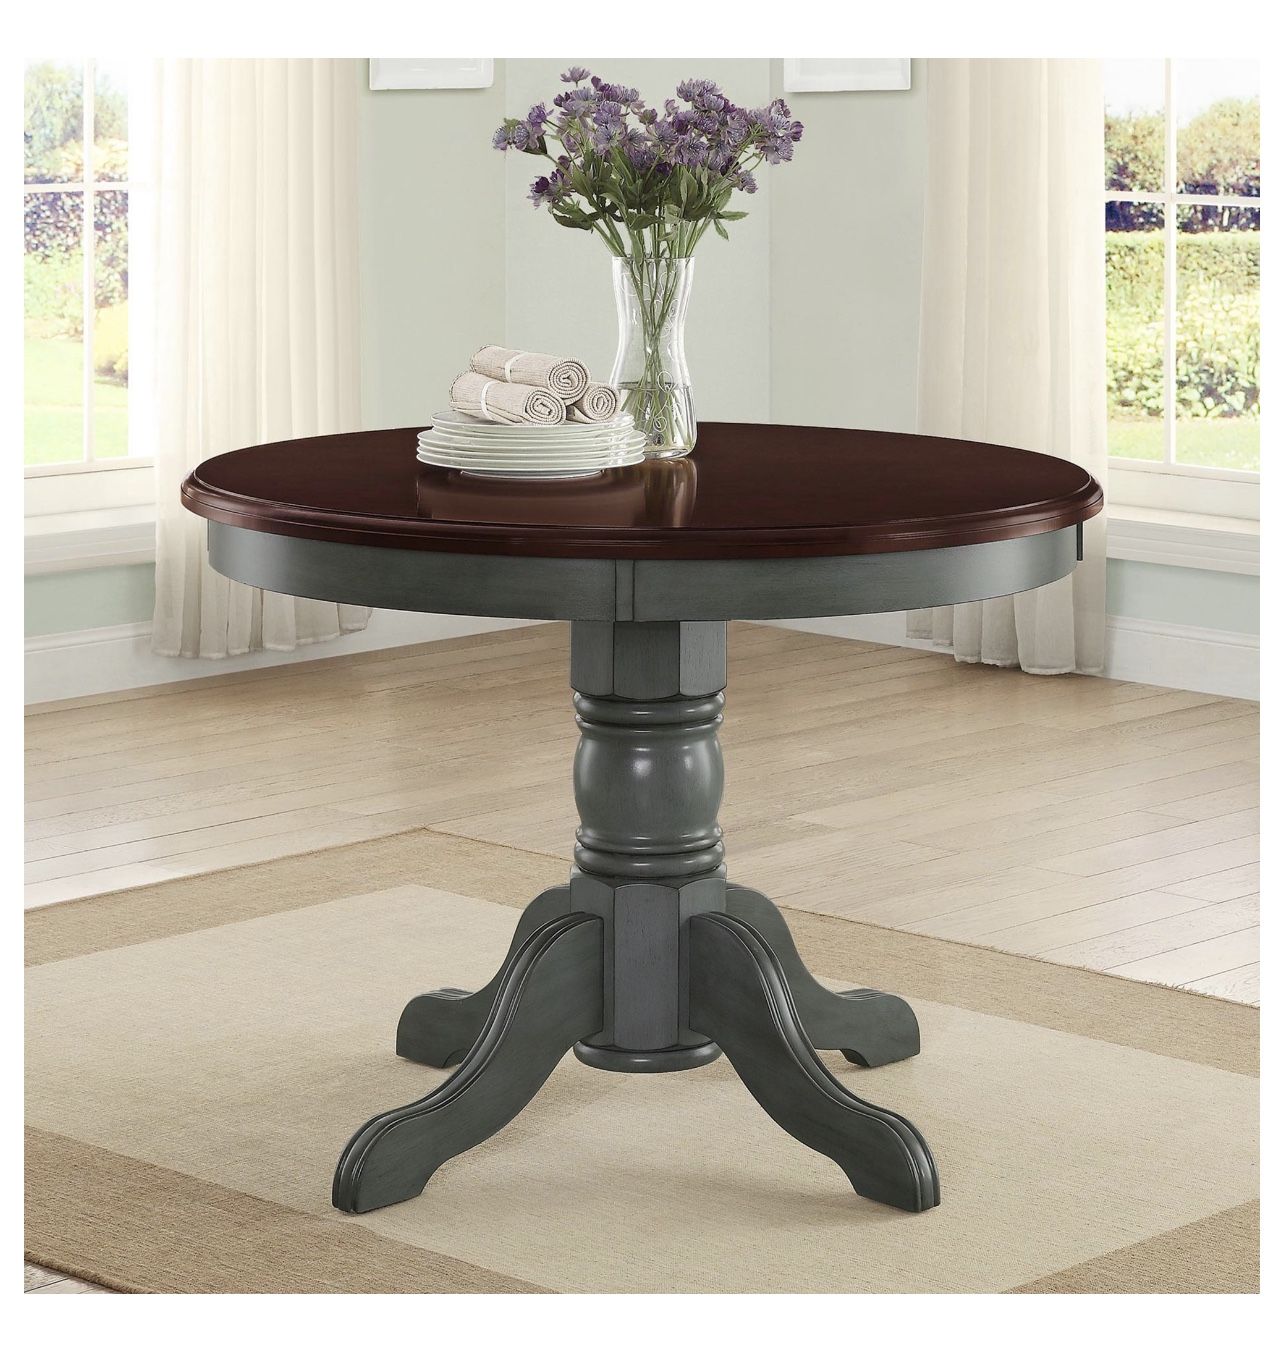 Better Homes and Gardens Cambridge Place Dining Table, Green